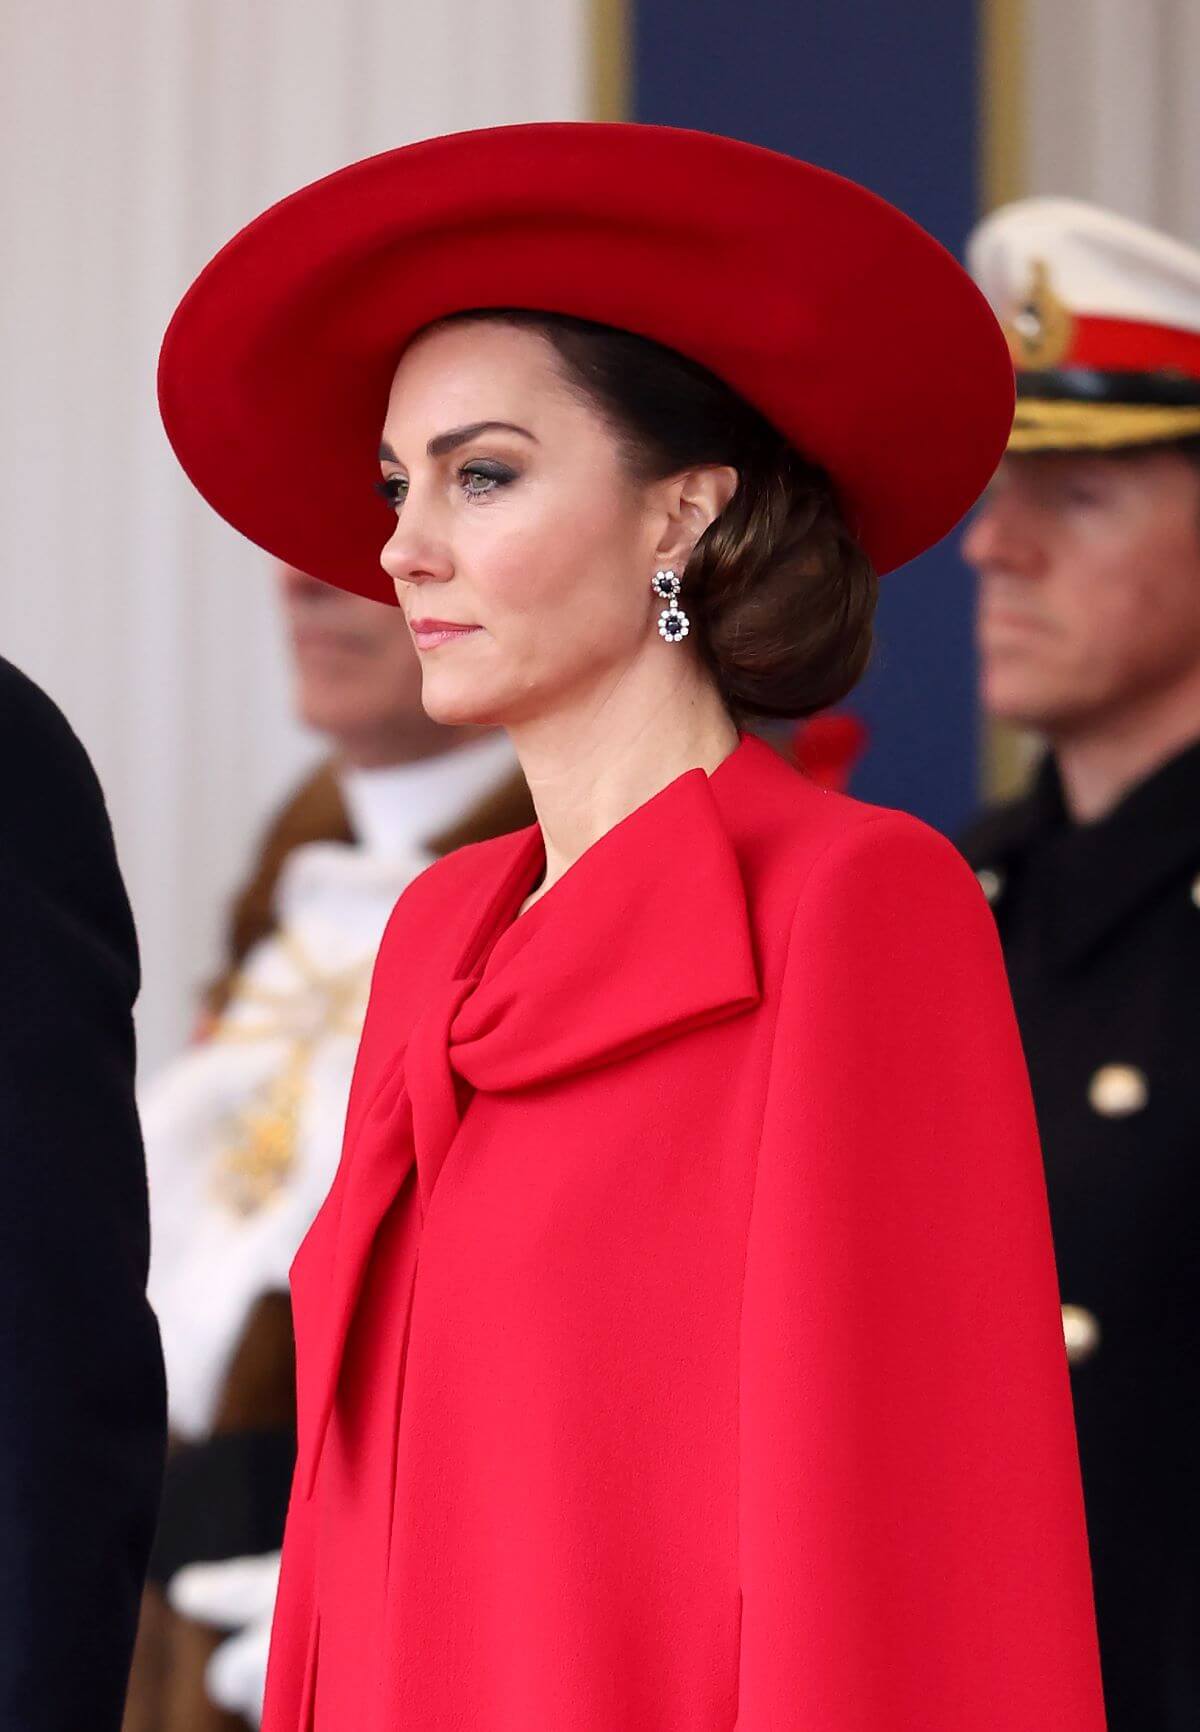 Kate Middleton wearing red during the ceremonial welcome for the president and first lady of the Republic of Korea